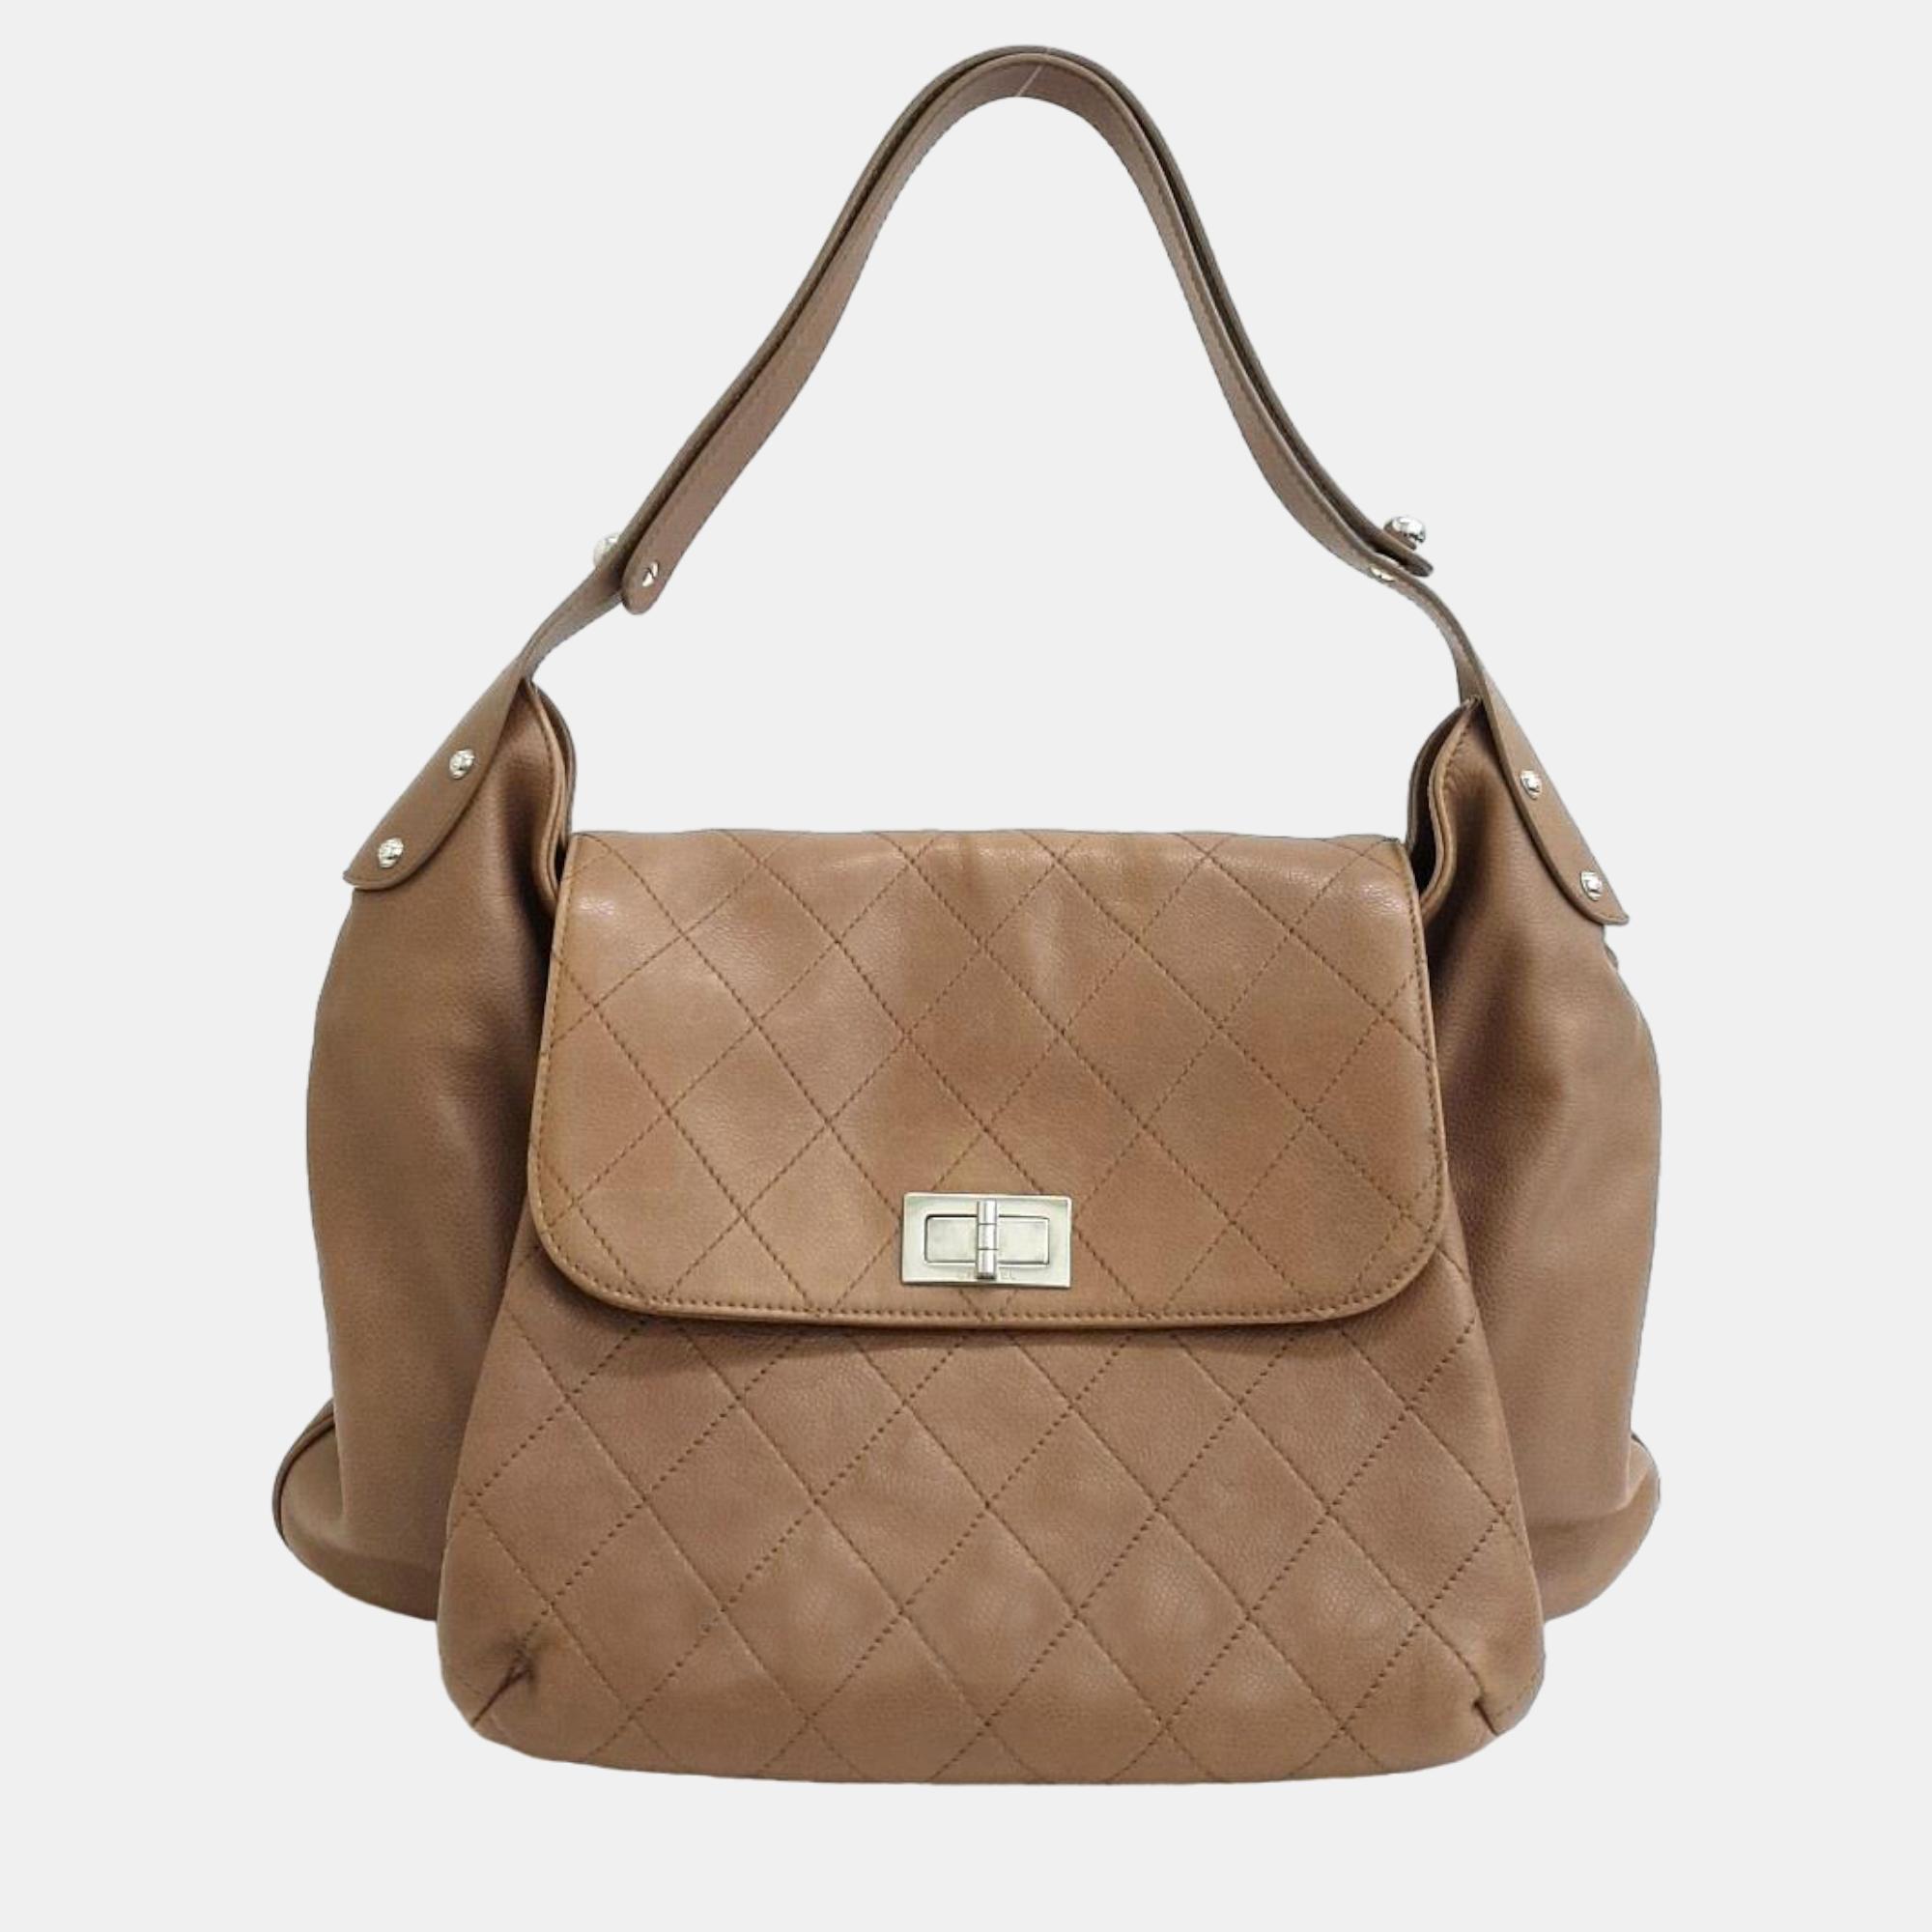 Chanel beige leather wild stitch double flap tote bag